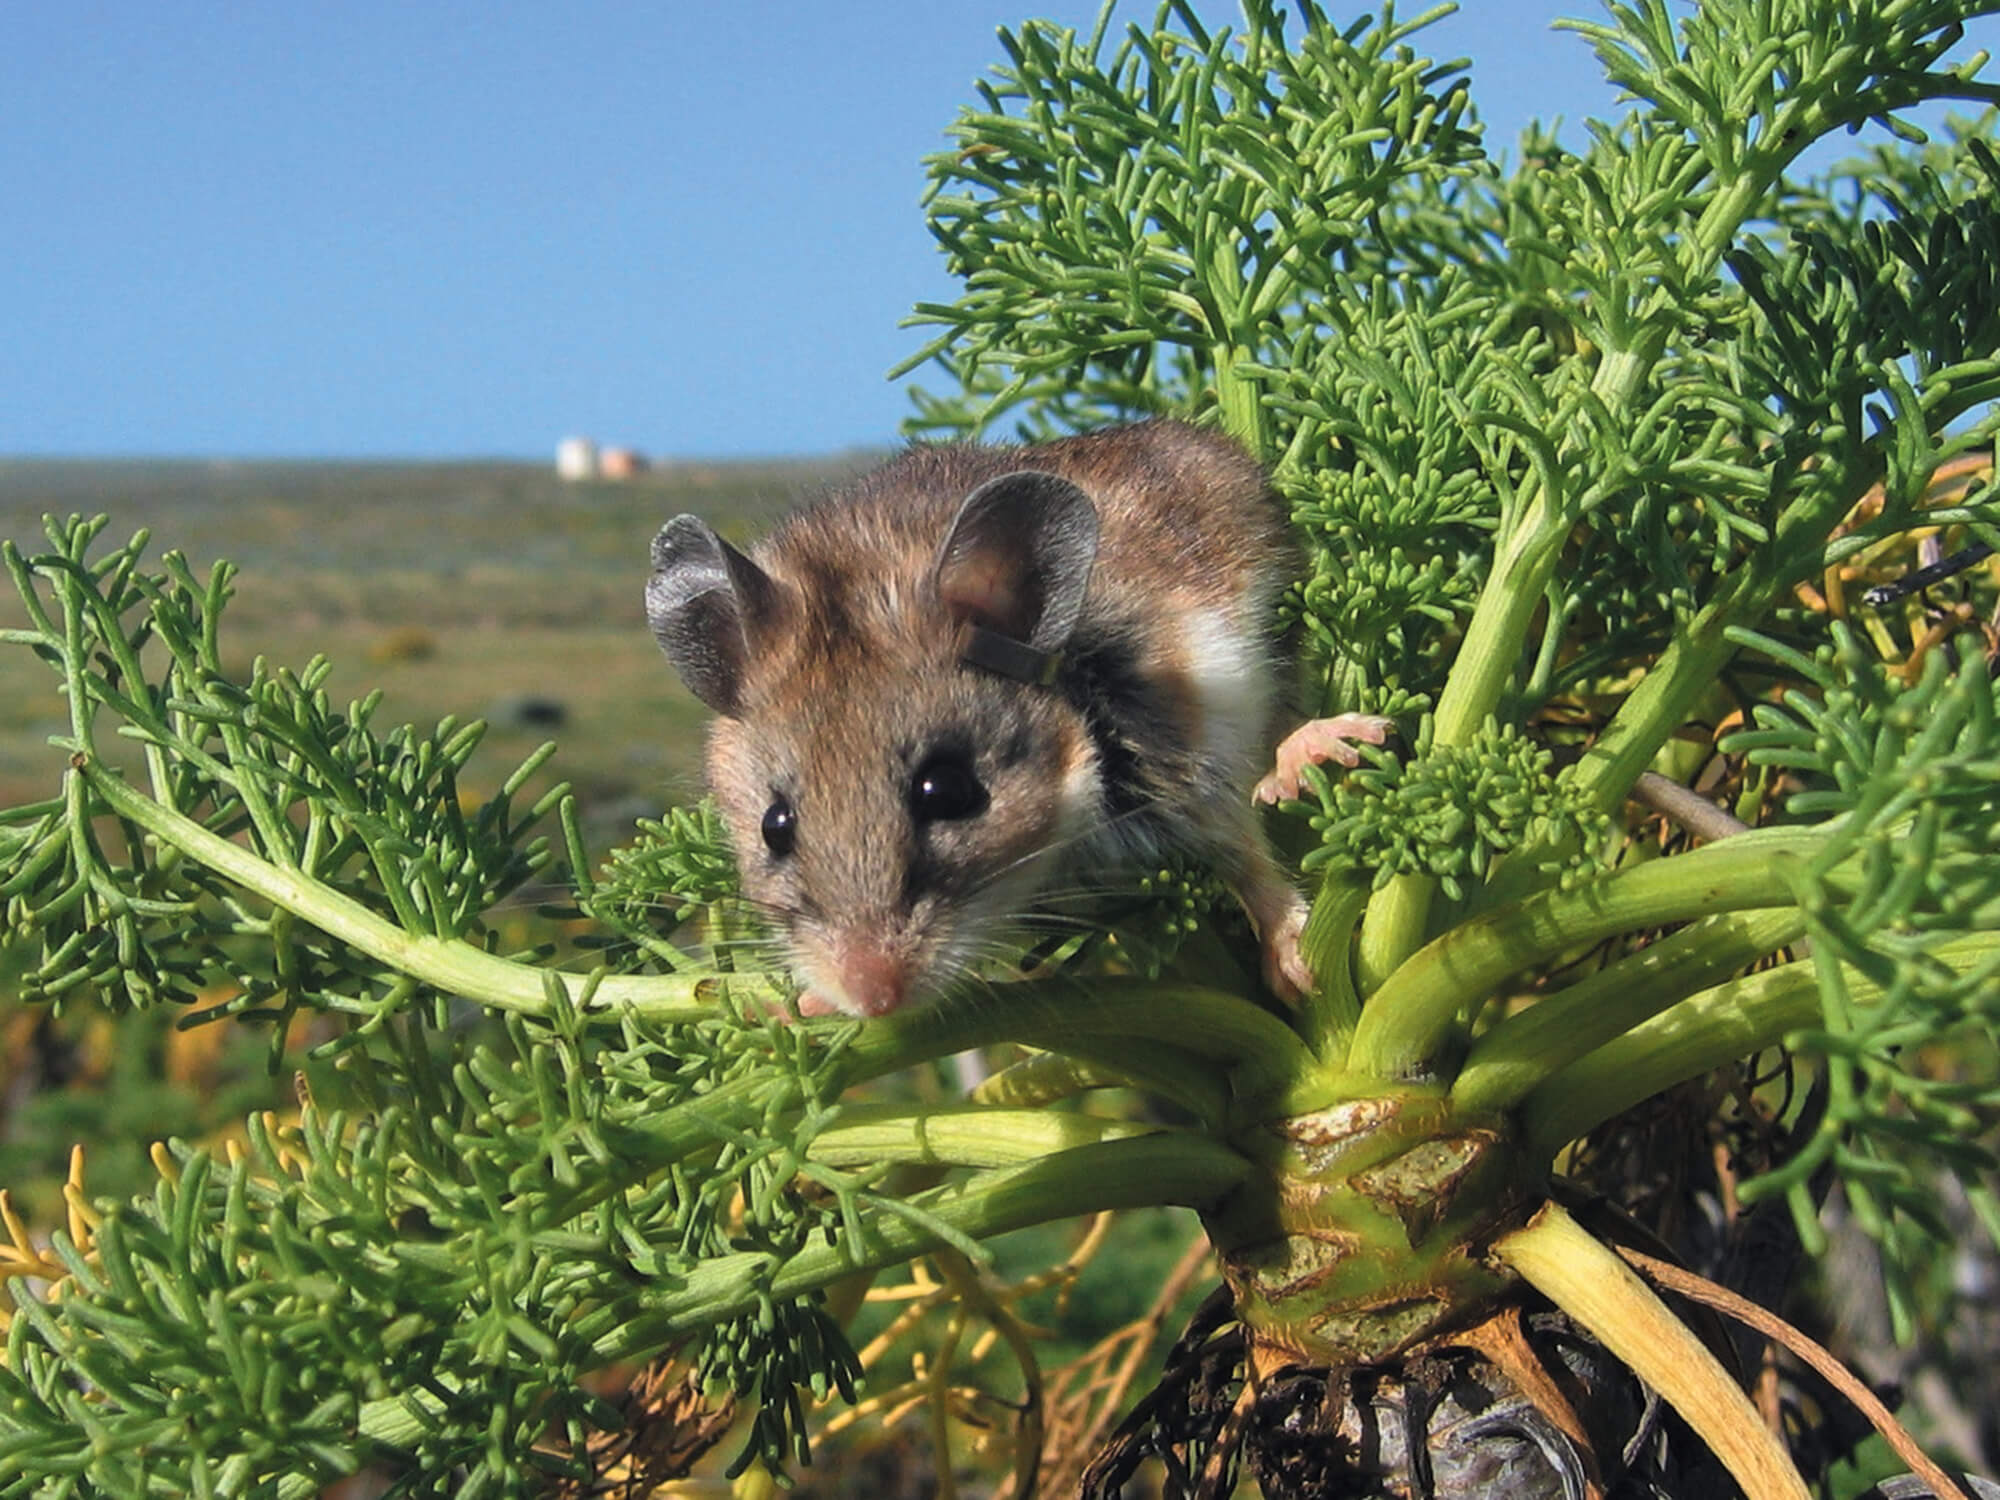 Channel Islands National Park Research on Effects of Seed Predators